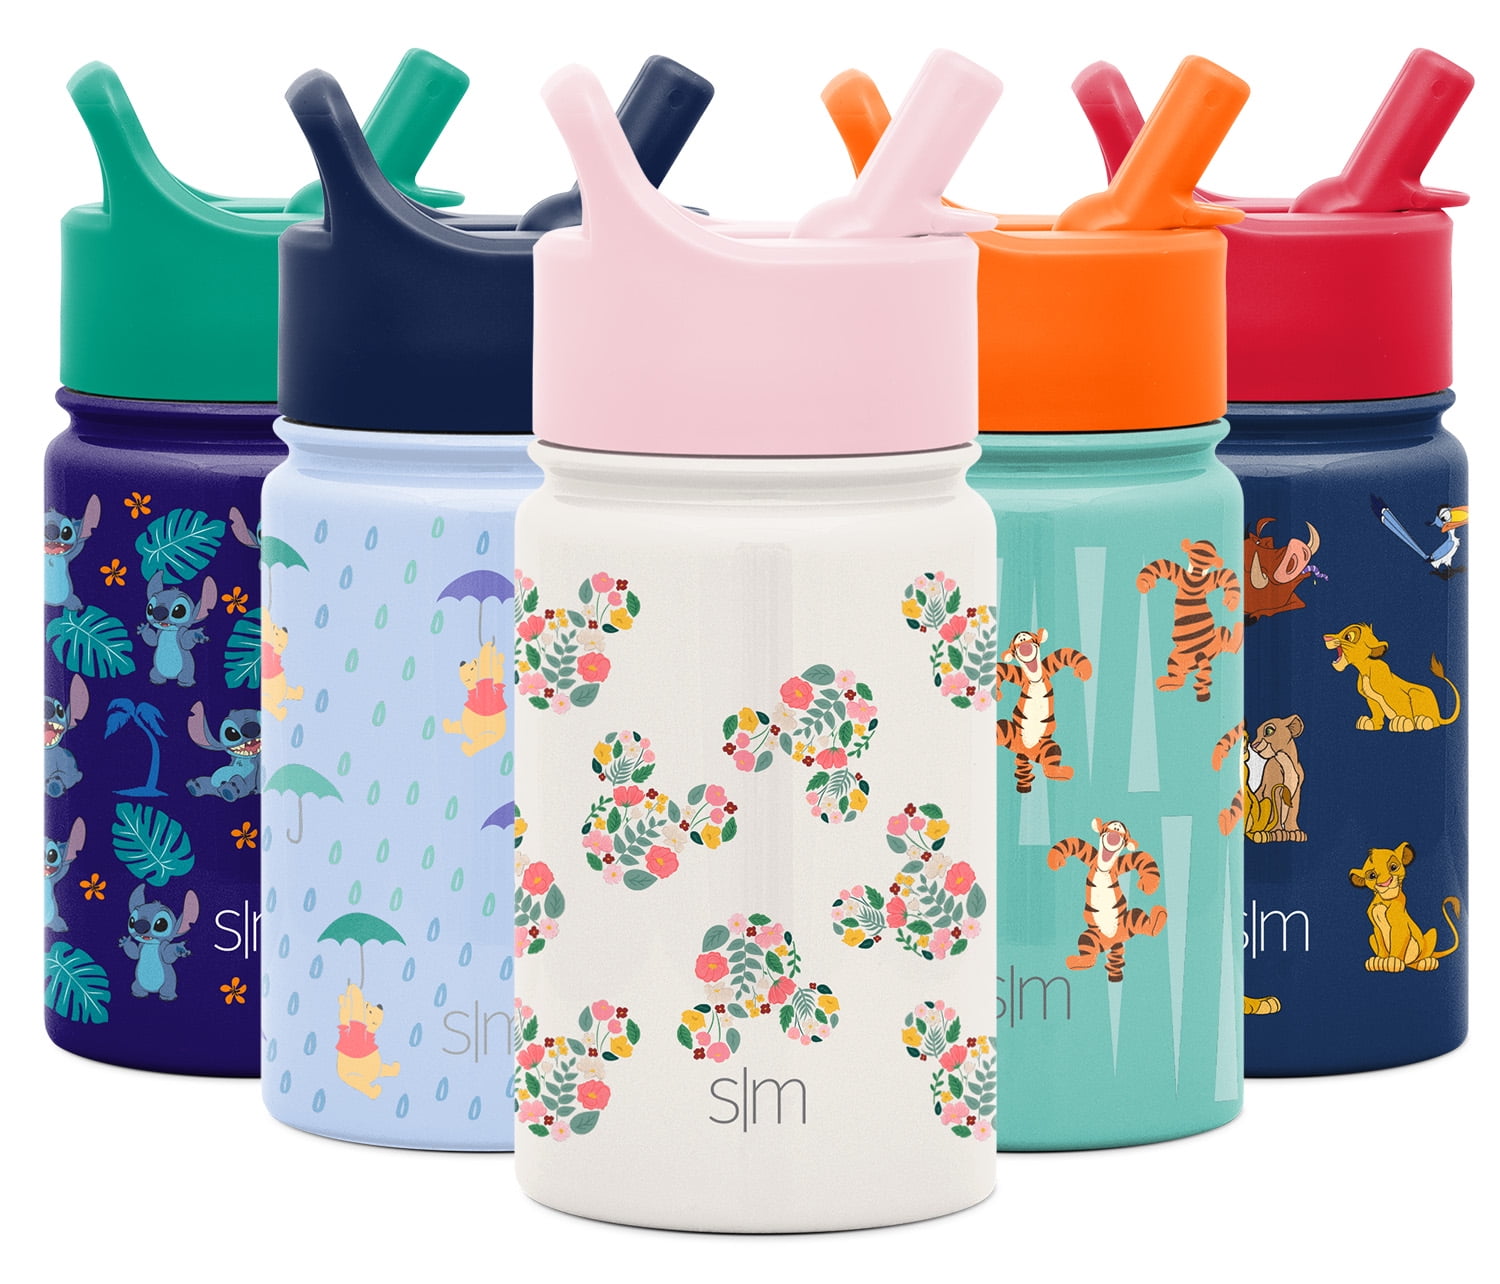 8 Disney Water Bottles That Are Perfect for the Parks!